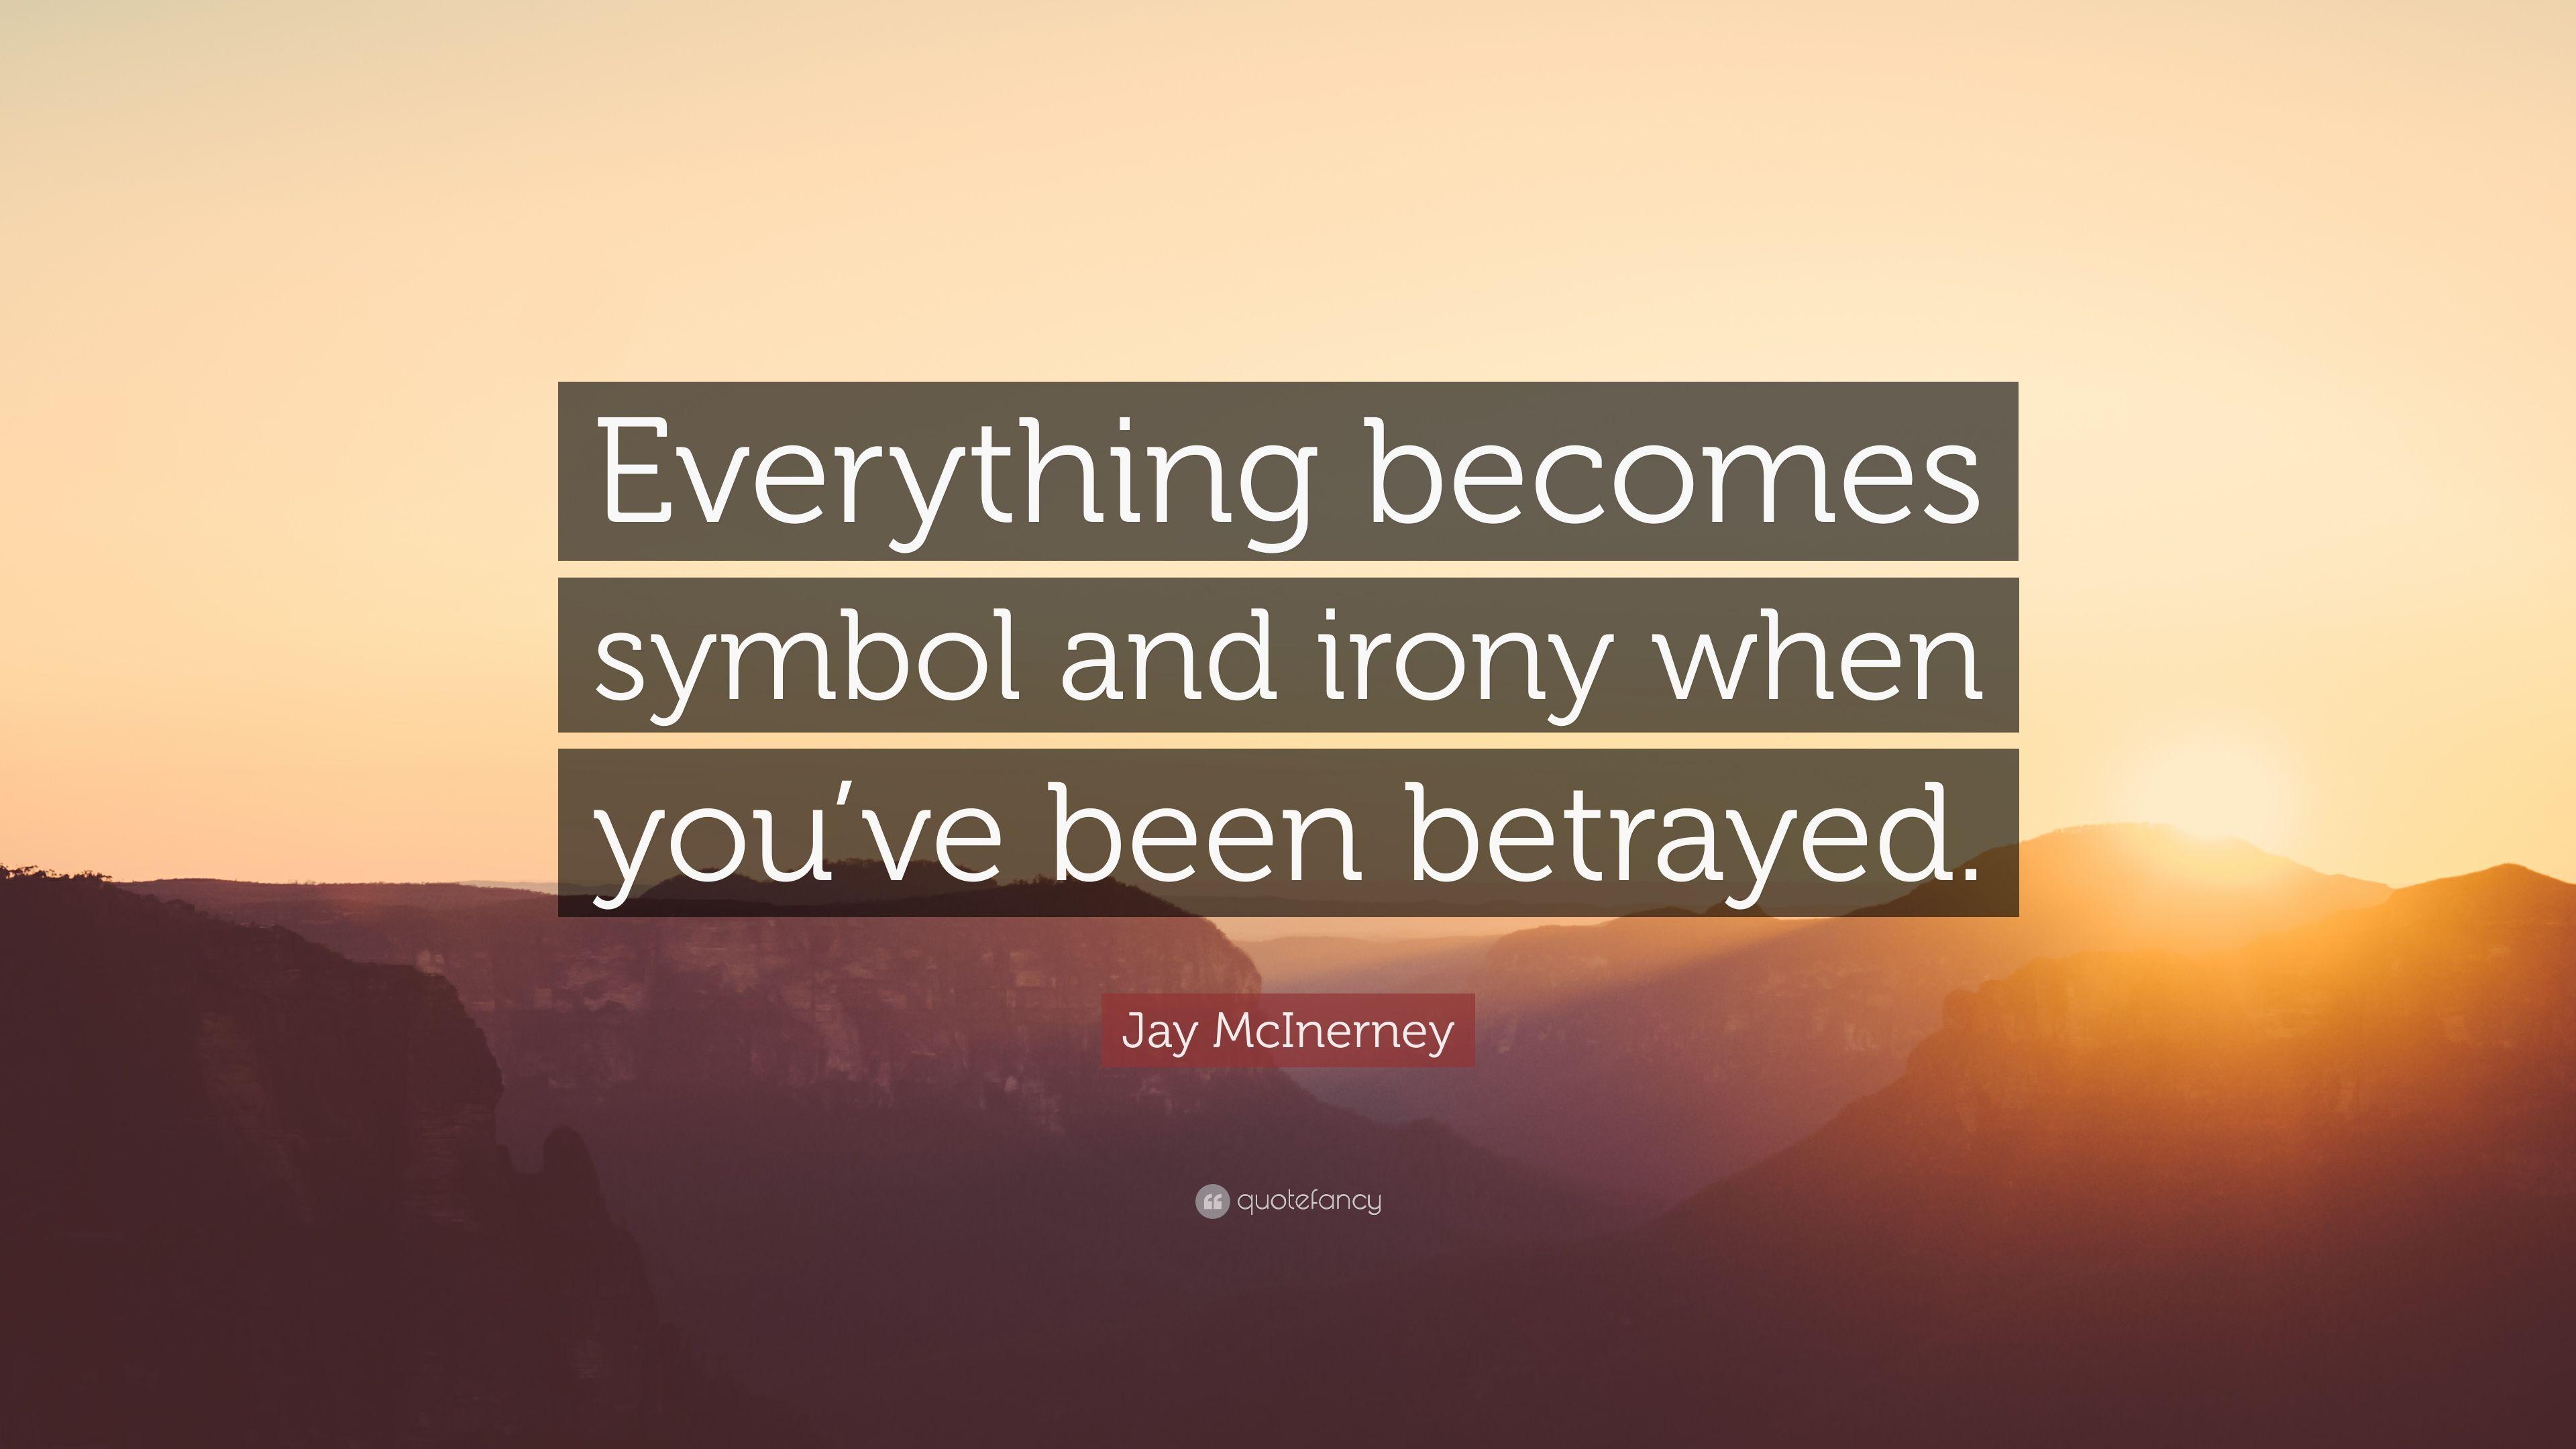 Jay McInerney Quote: “Everything becomes symbol and irony when you